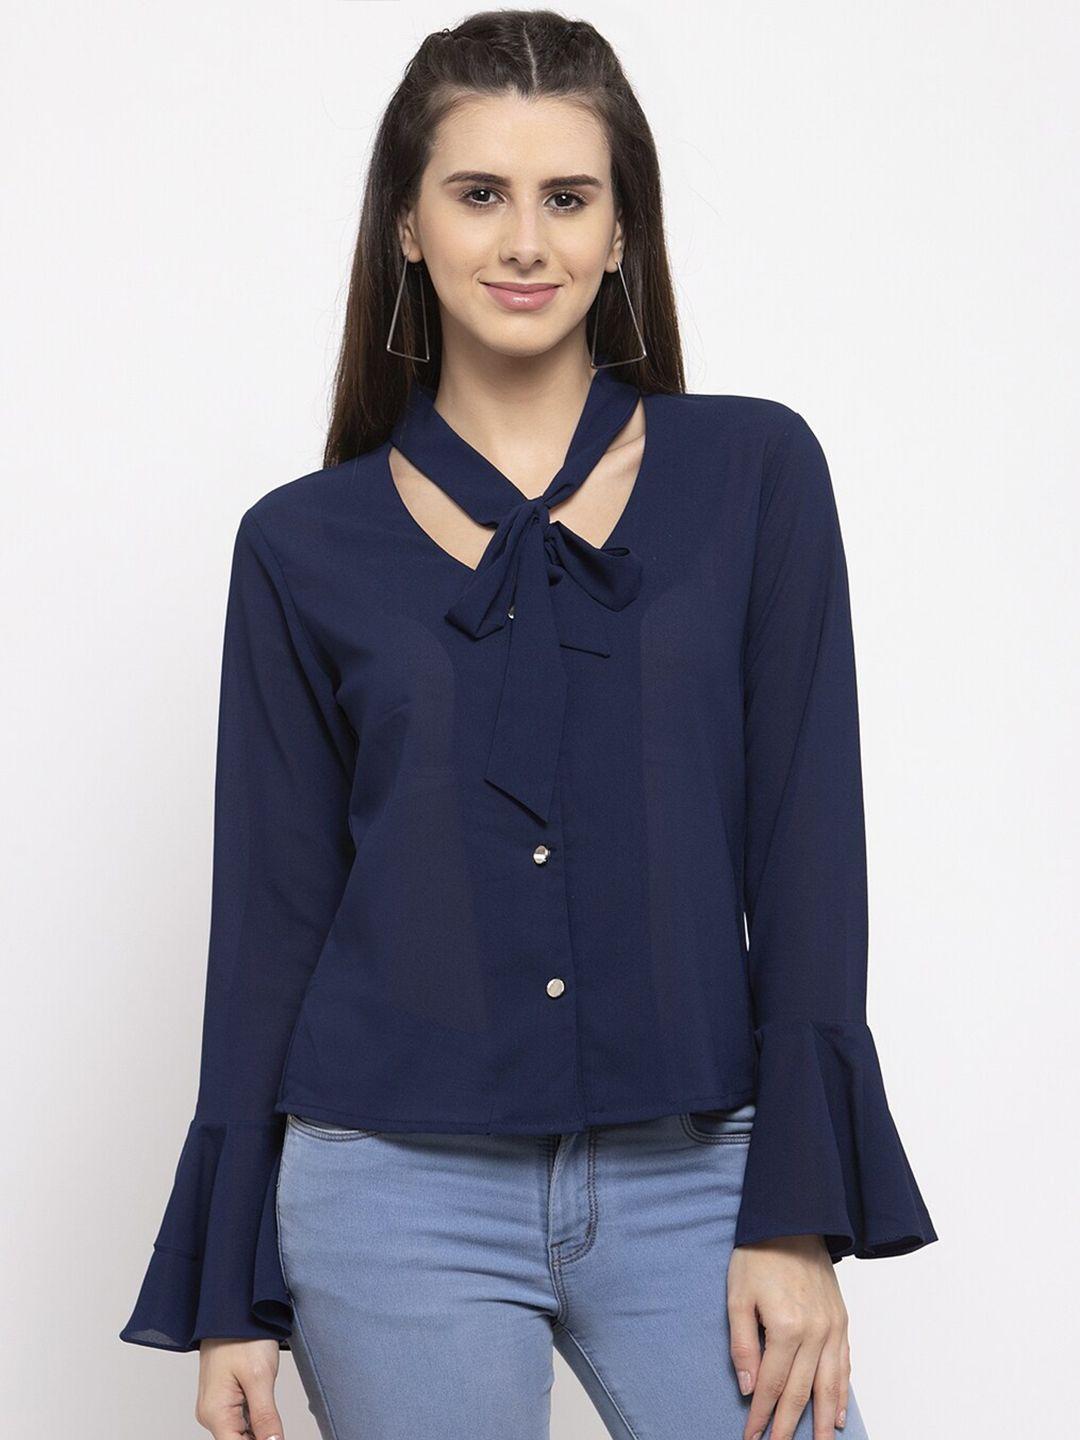 claura-navy-blue-solid-tie-up-neck-georgette-shirt-style-top